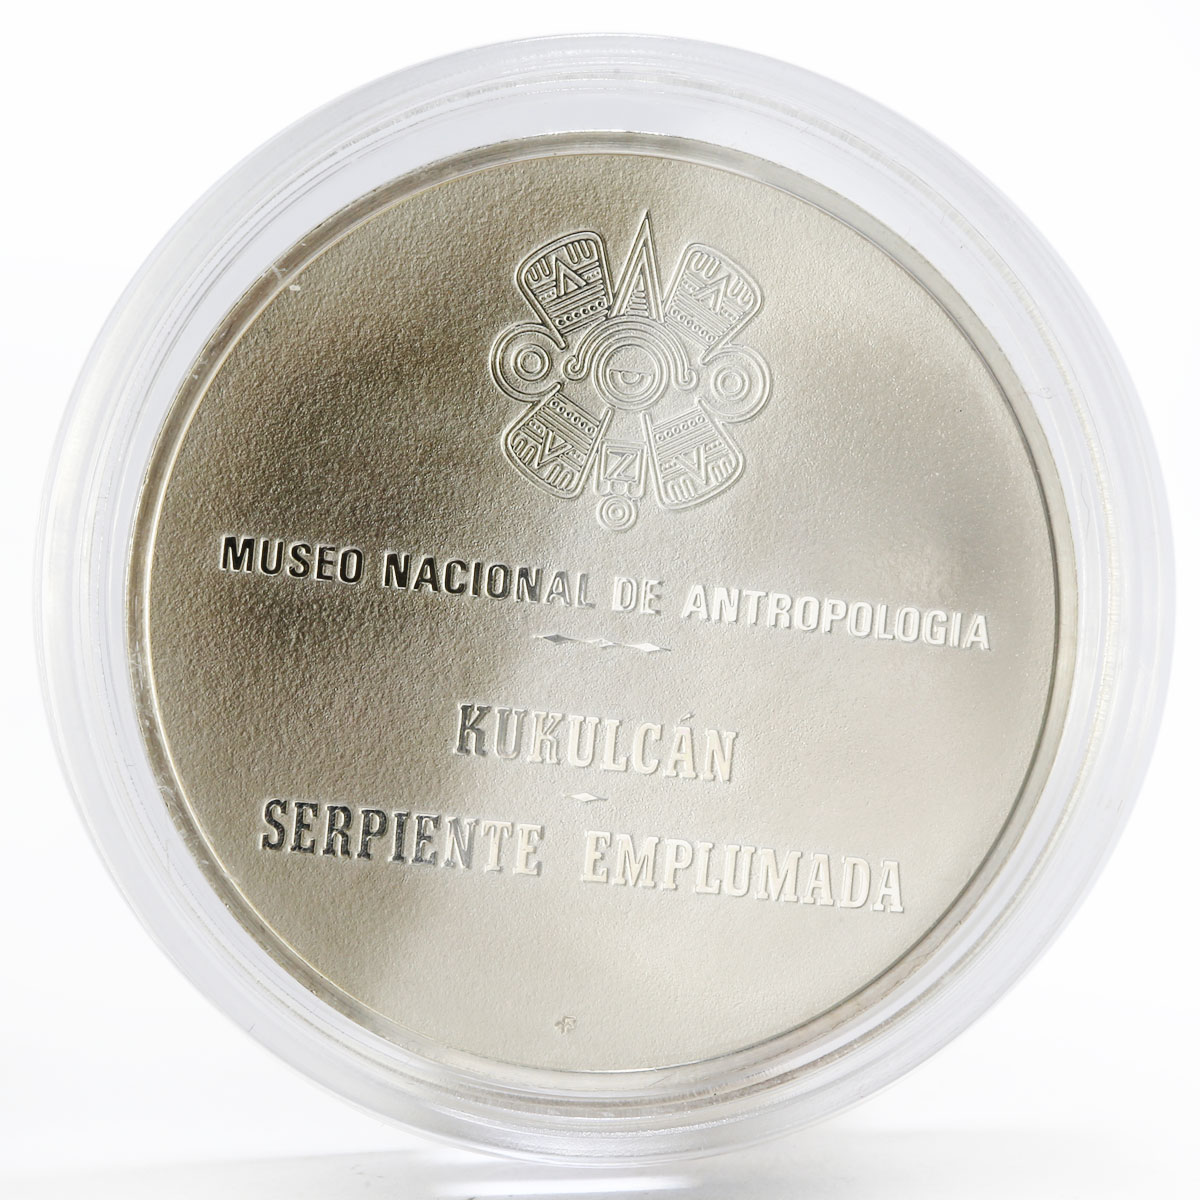 Mexico National Museum of Anthropology series Kukulkan gilded silver medal 2012